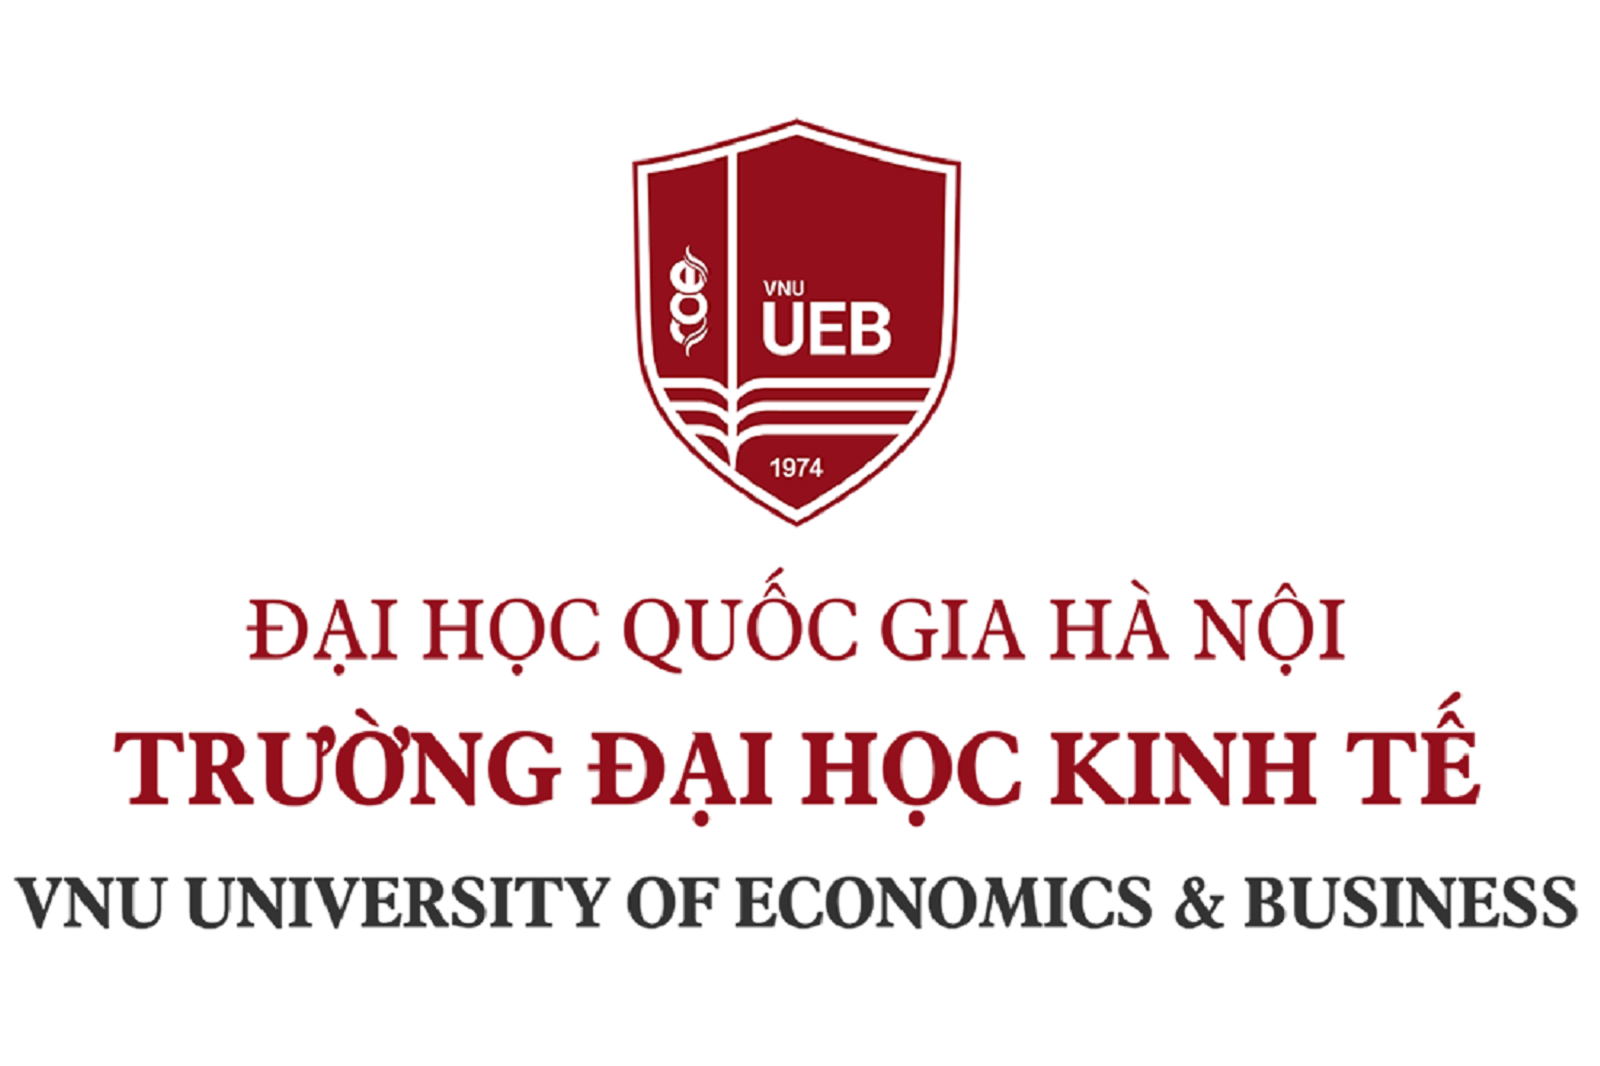 Instruction for using the logo of the University of Economics and Business – VNU, Hanoi